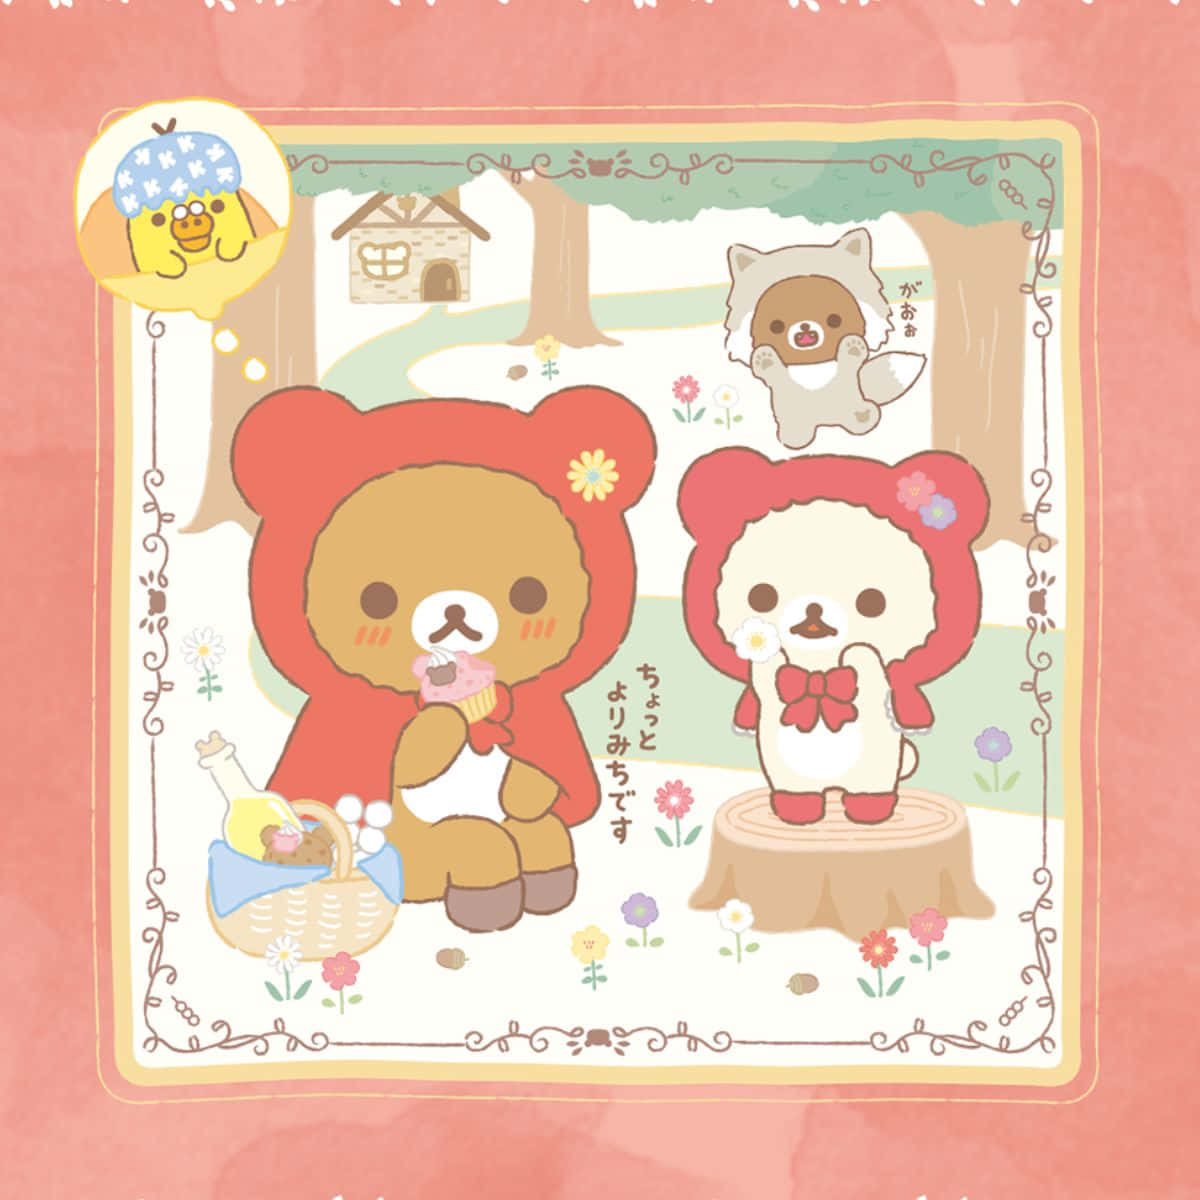 Adorable Rilakkuma Relaxing on a Dreamy Pastel Background